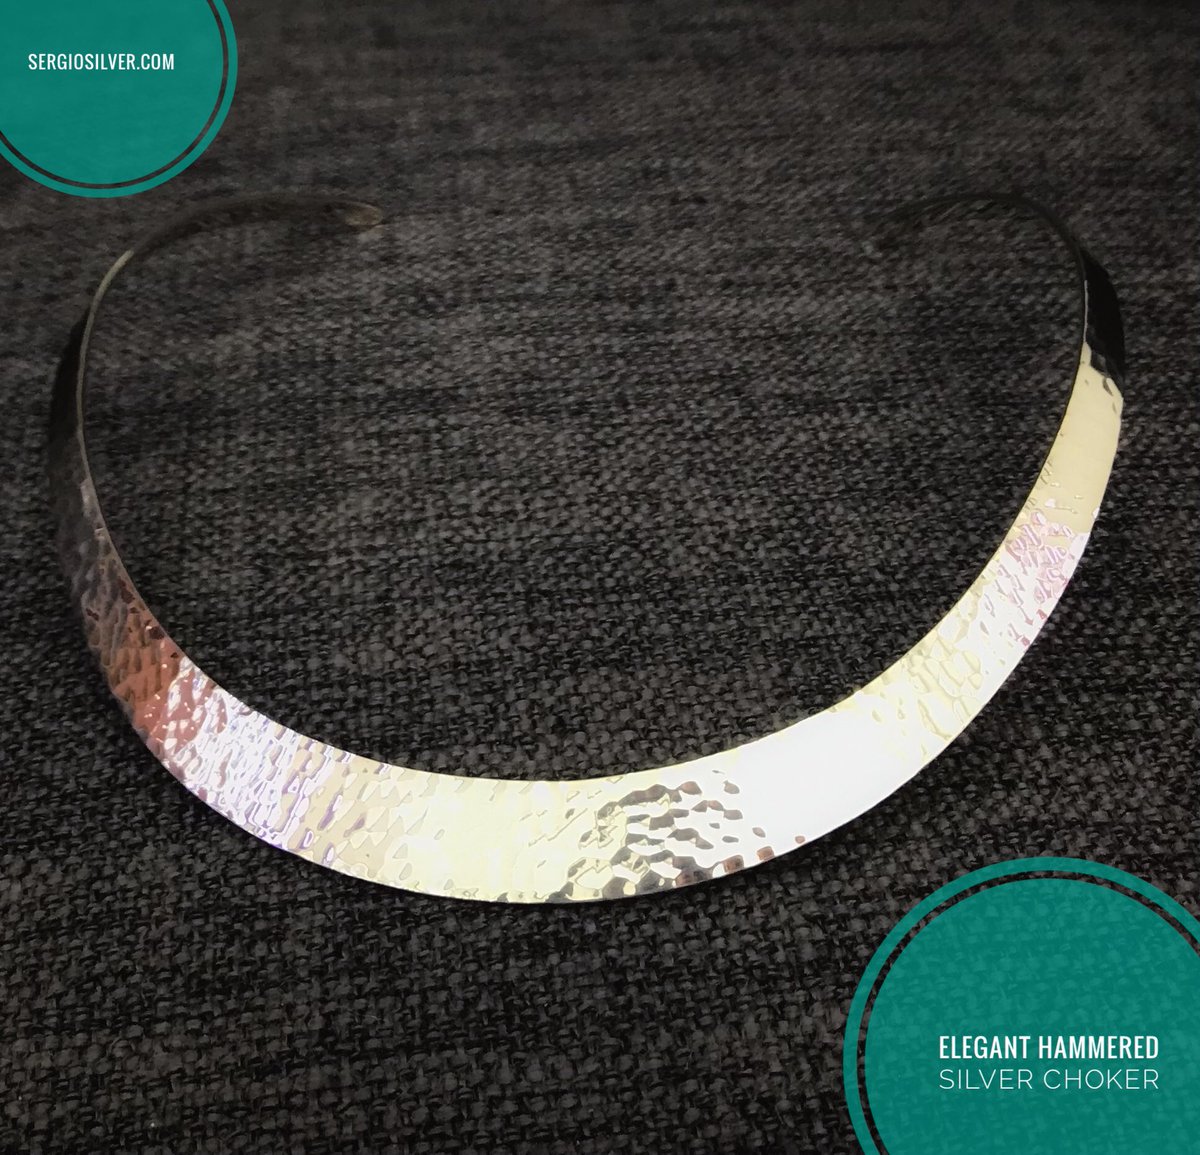 Elegant sterling silver choker with the hammered look.
.
#sergiosilvercoz #hammeredjewelry #hammered #design #silverchoker #silver #chokernecklace #shop #shopping #cozumel #onlineshopping #onlineshop #jewelry #fashion #style